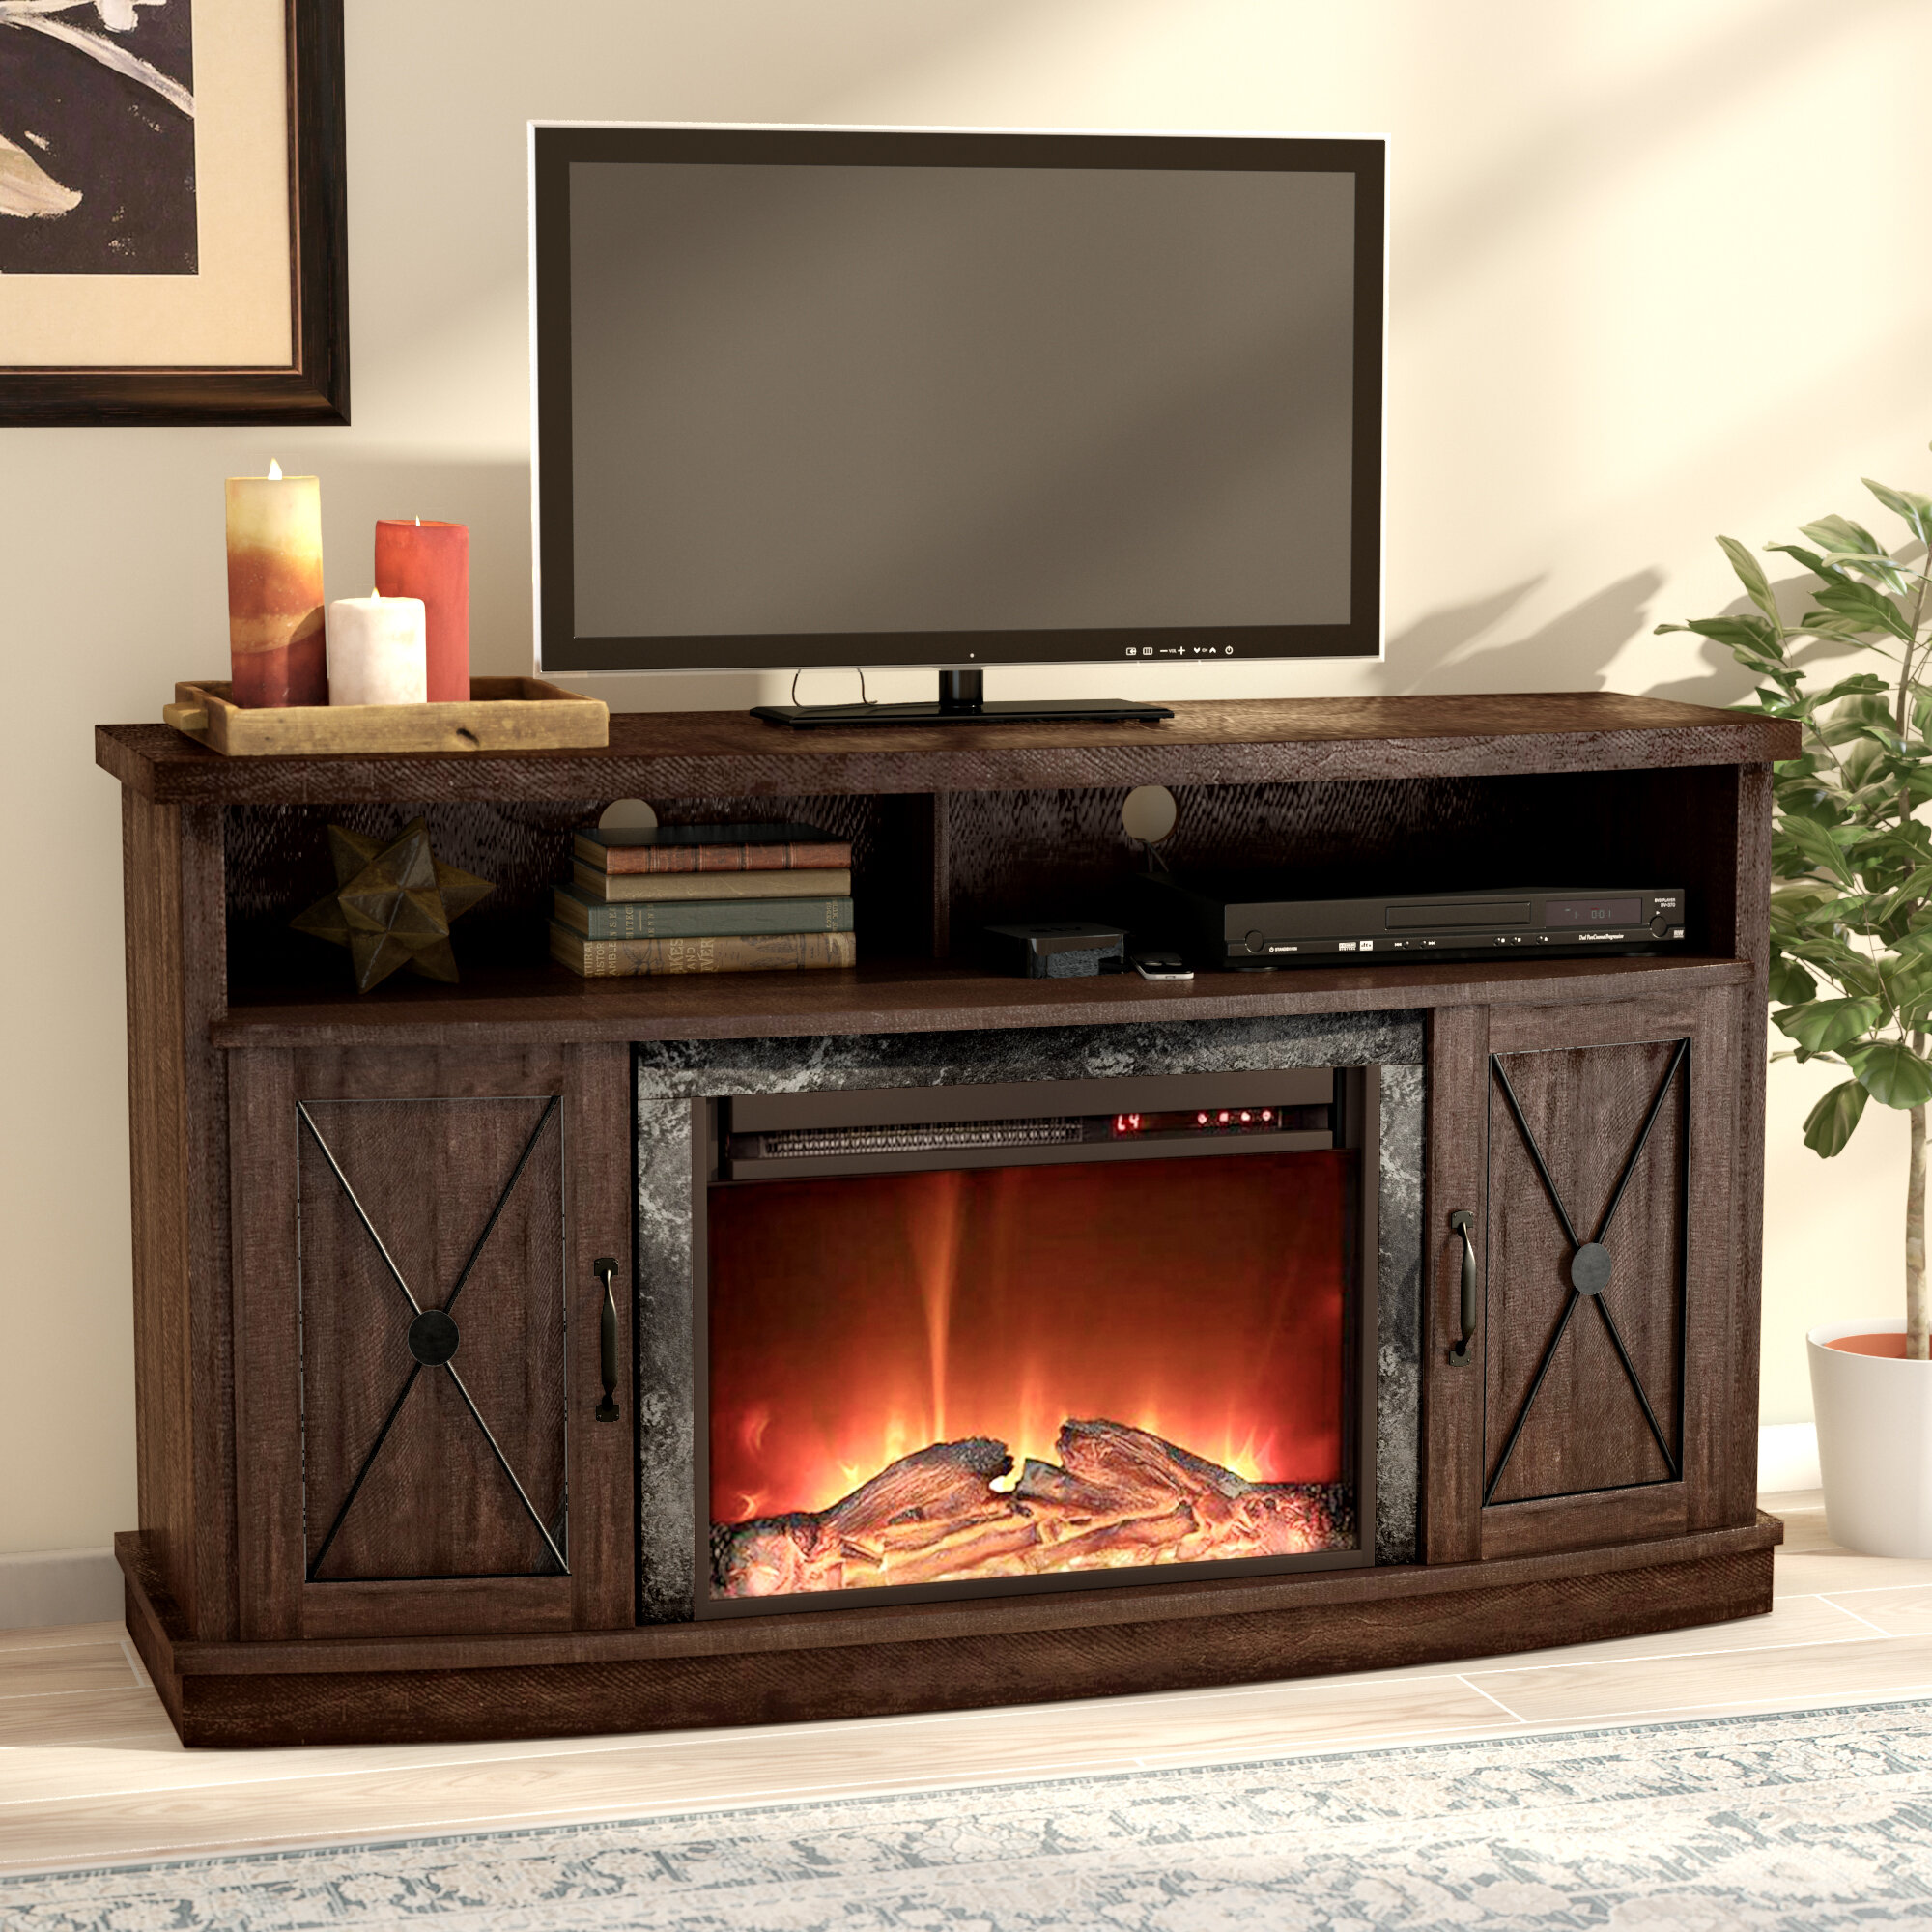 Stone Electric Fireplace Tv Stand Luxury Media Fireplace with Remote